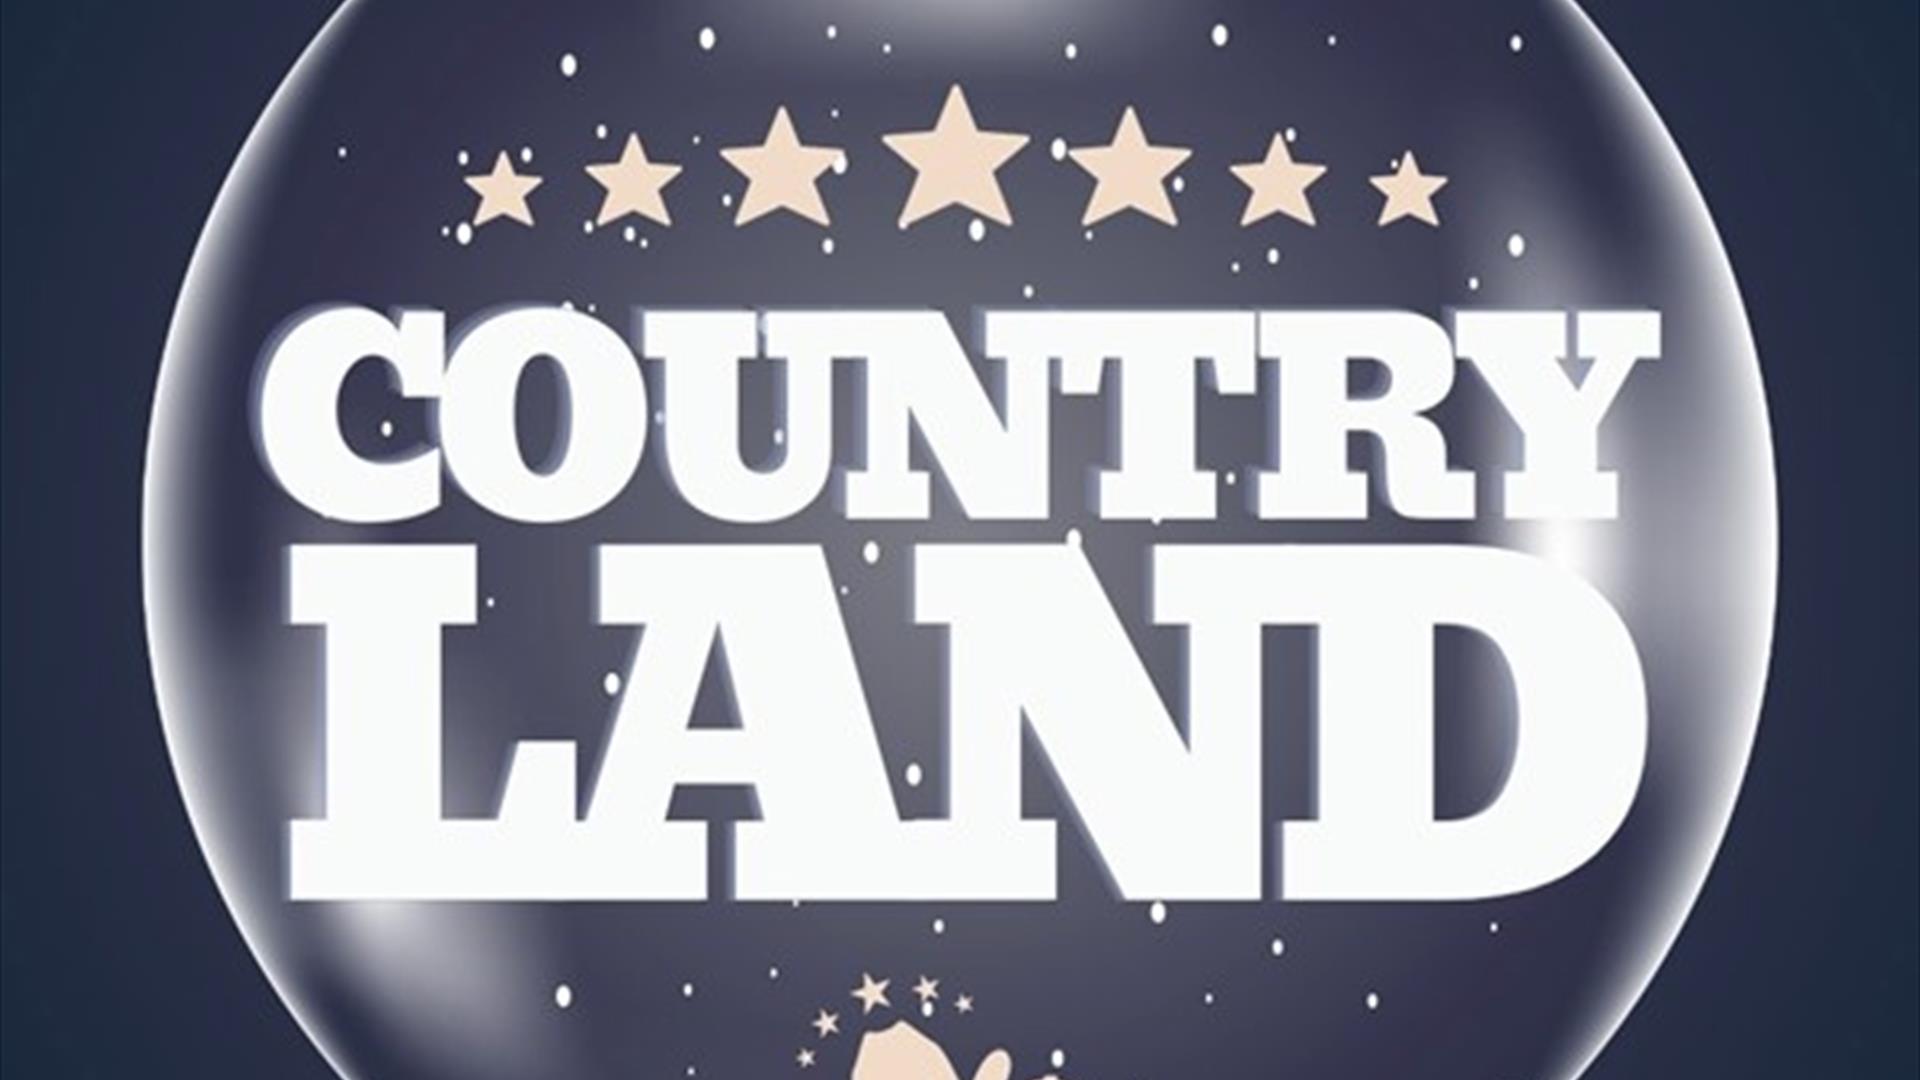 A poster advertising Country Land with stars and cowboy boots and a hat